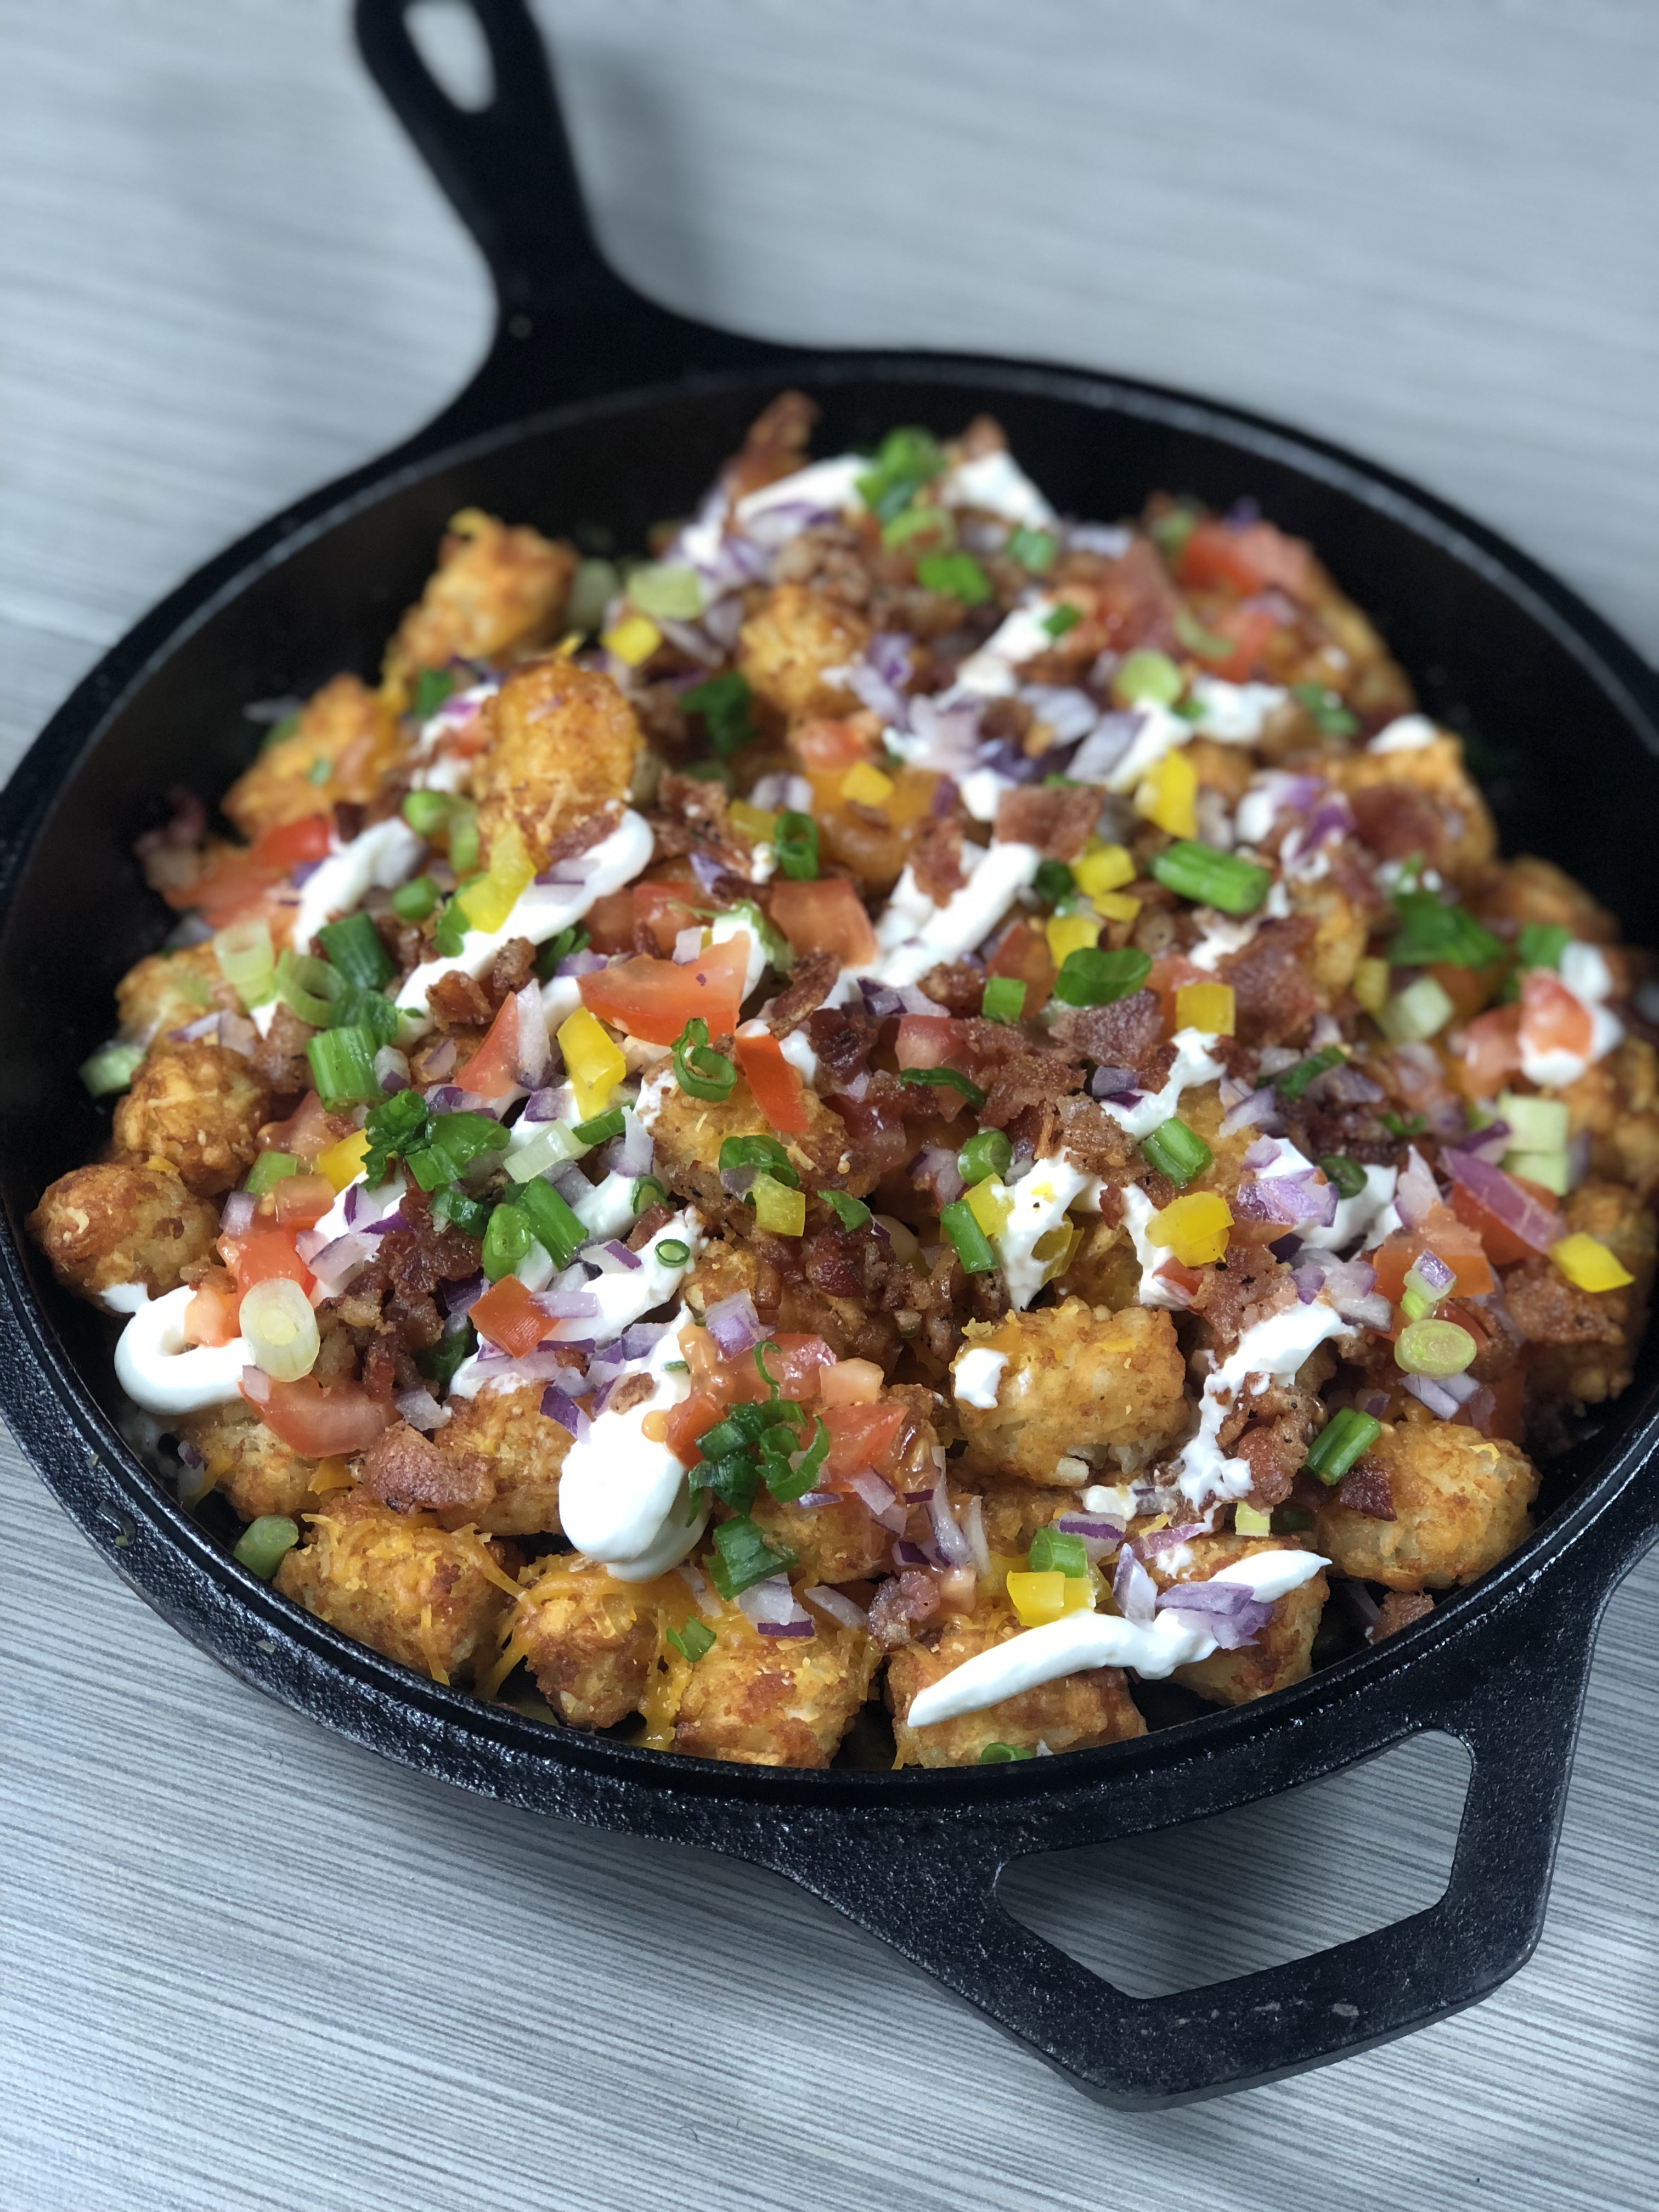 A photo of a cast iron skillet filledwith tater tots topped with melted cheese, sour cream, peppers, onions, tomatoes and scallion.